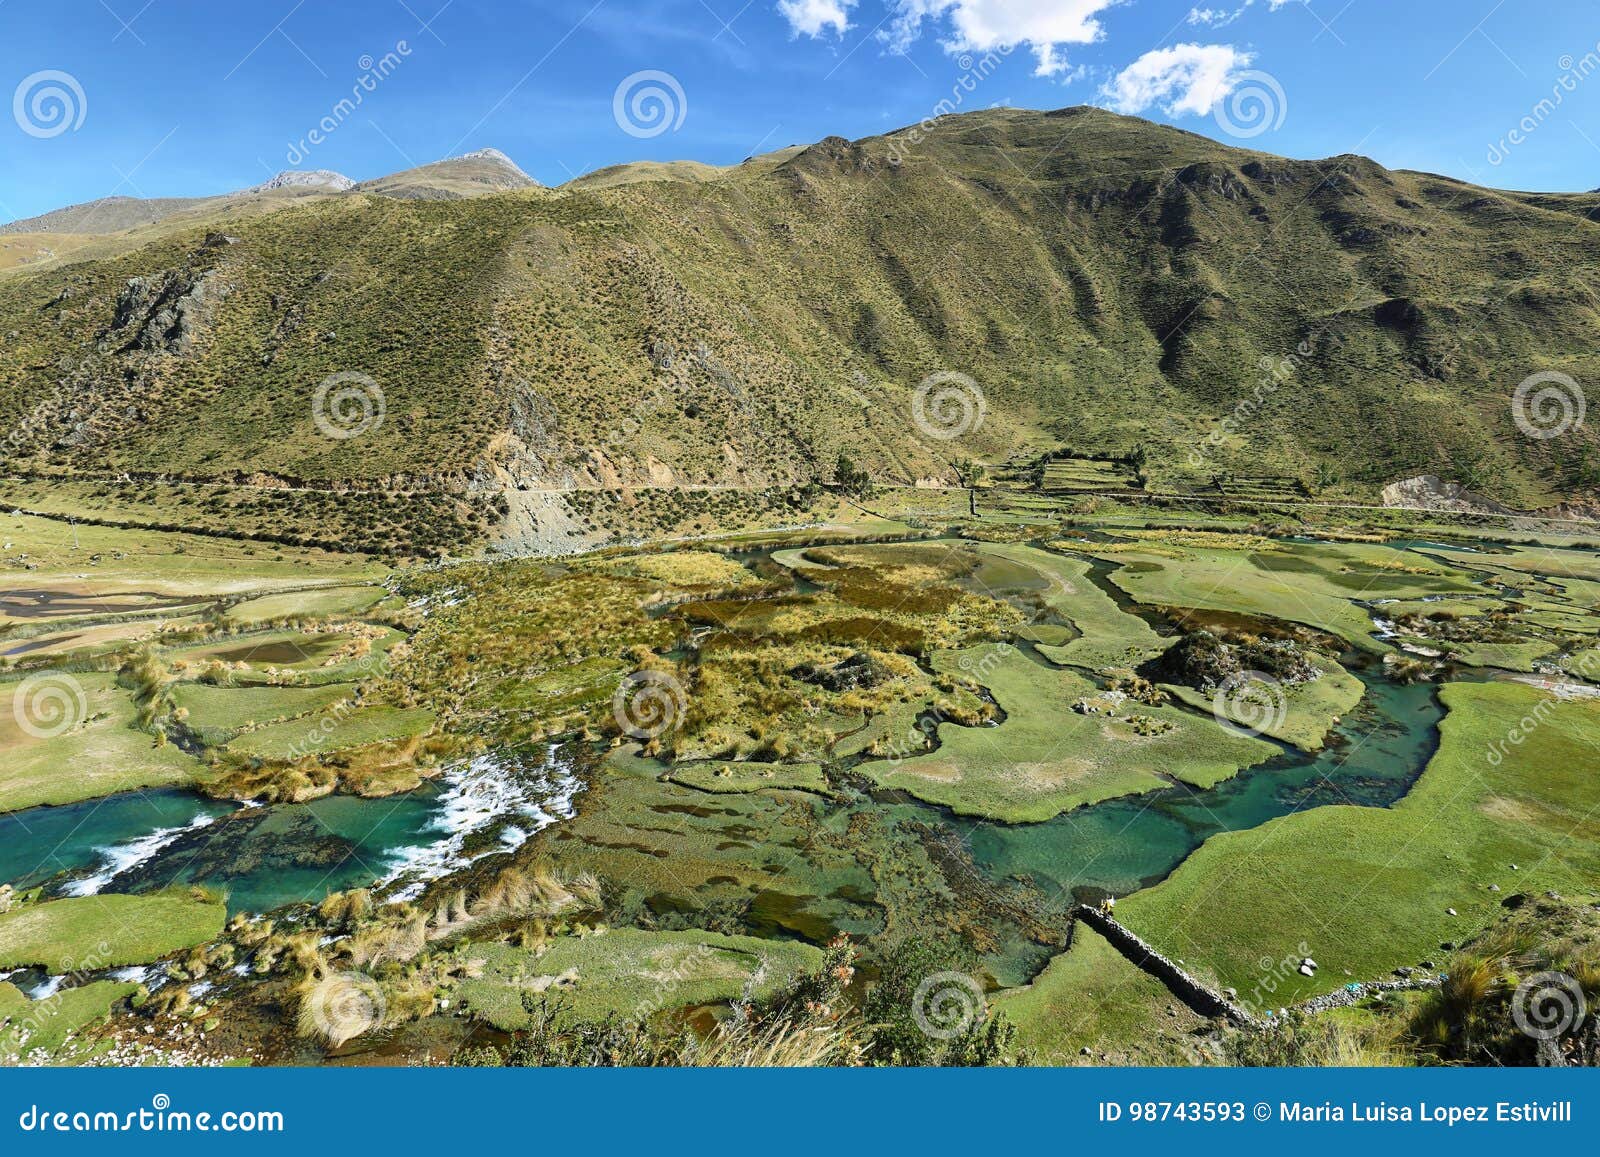 clear waters of caÃÂ±ete river near vilca villag, peru